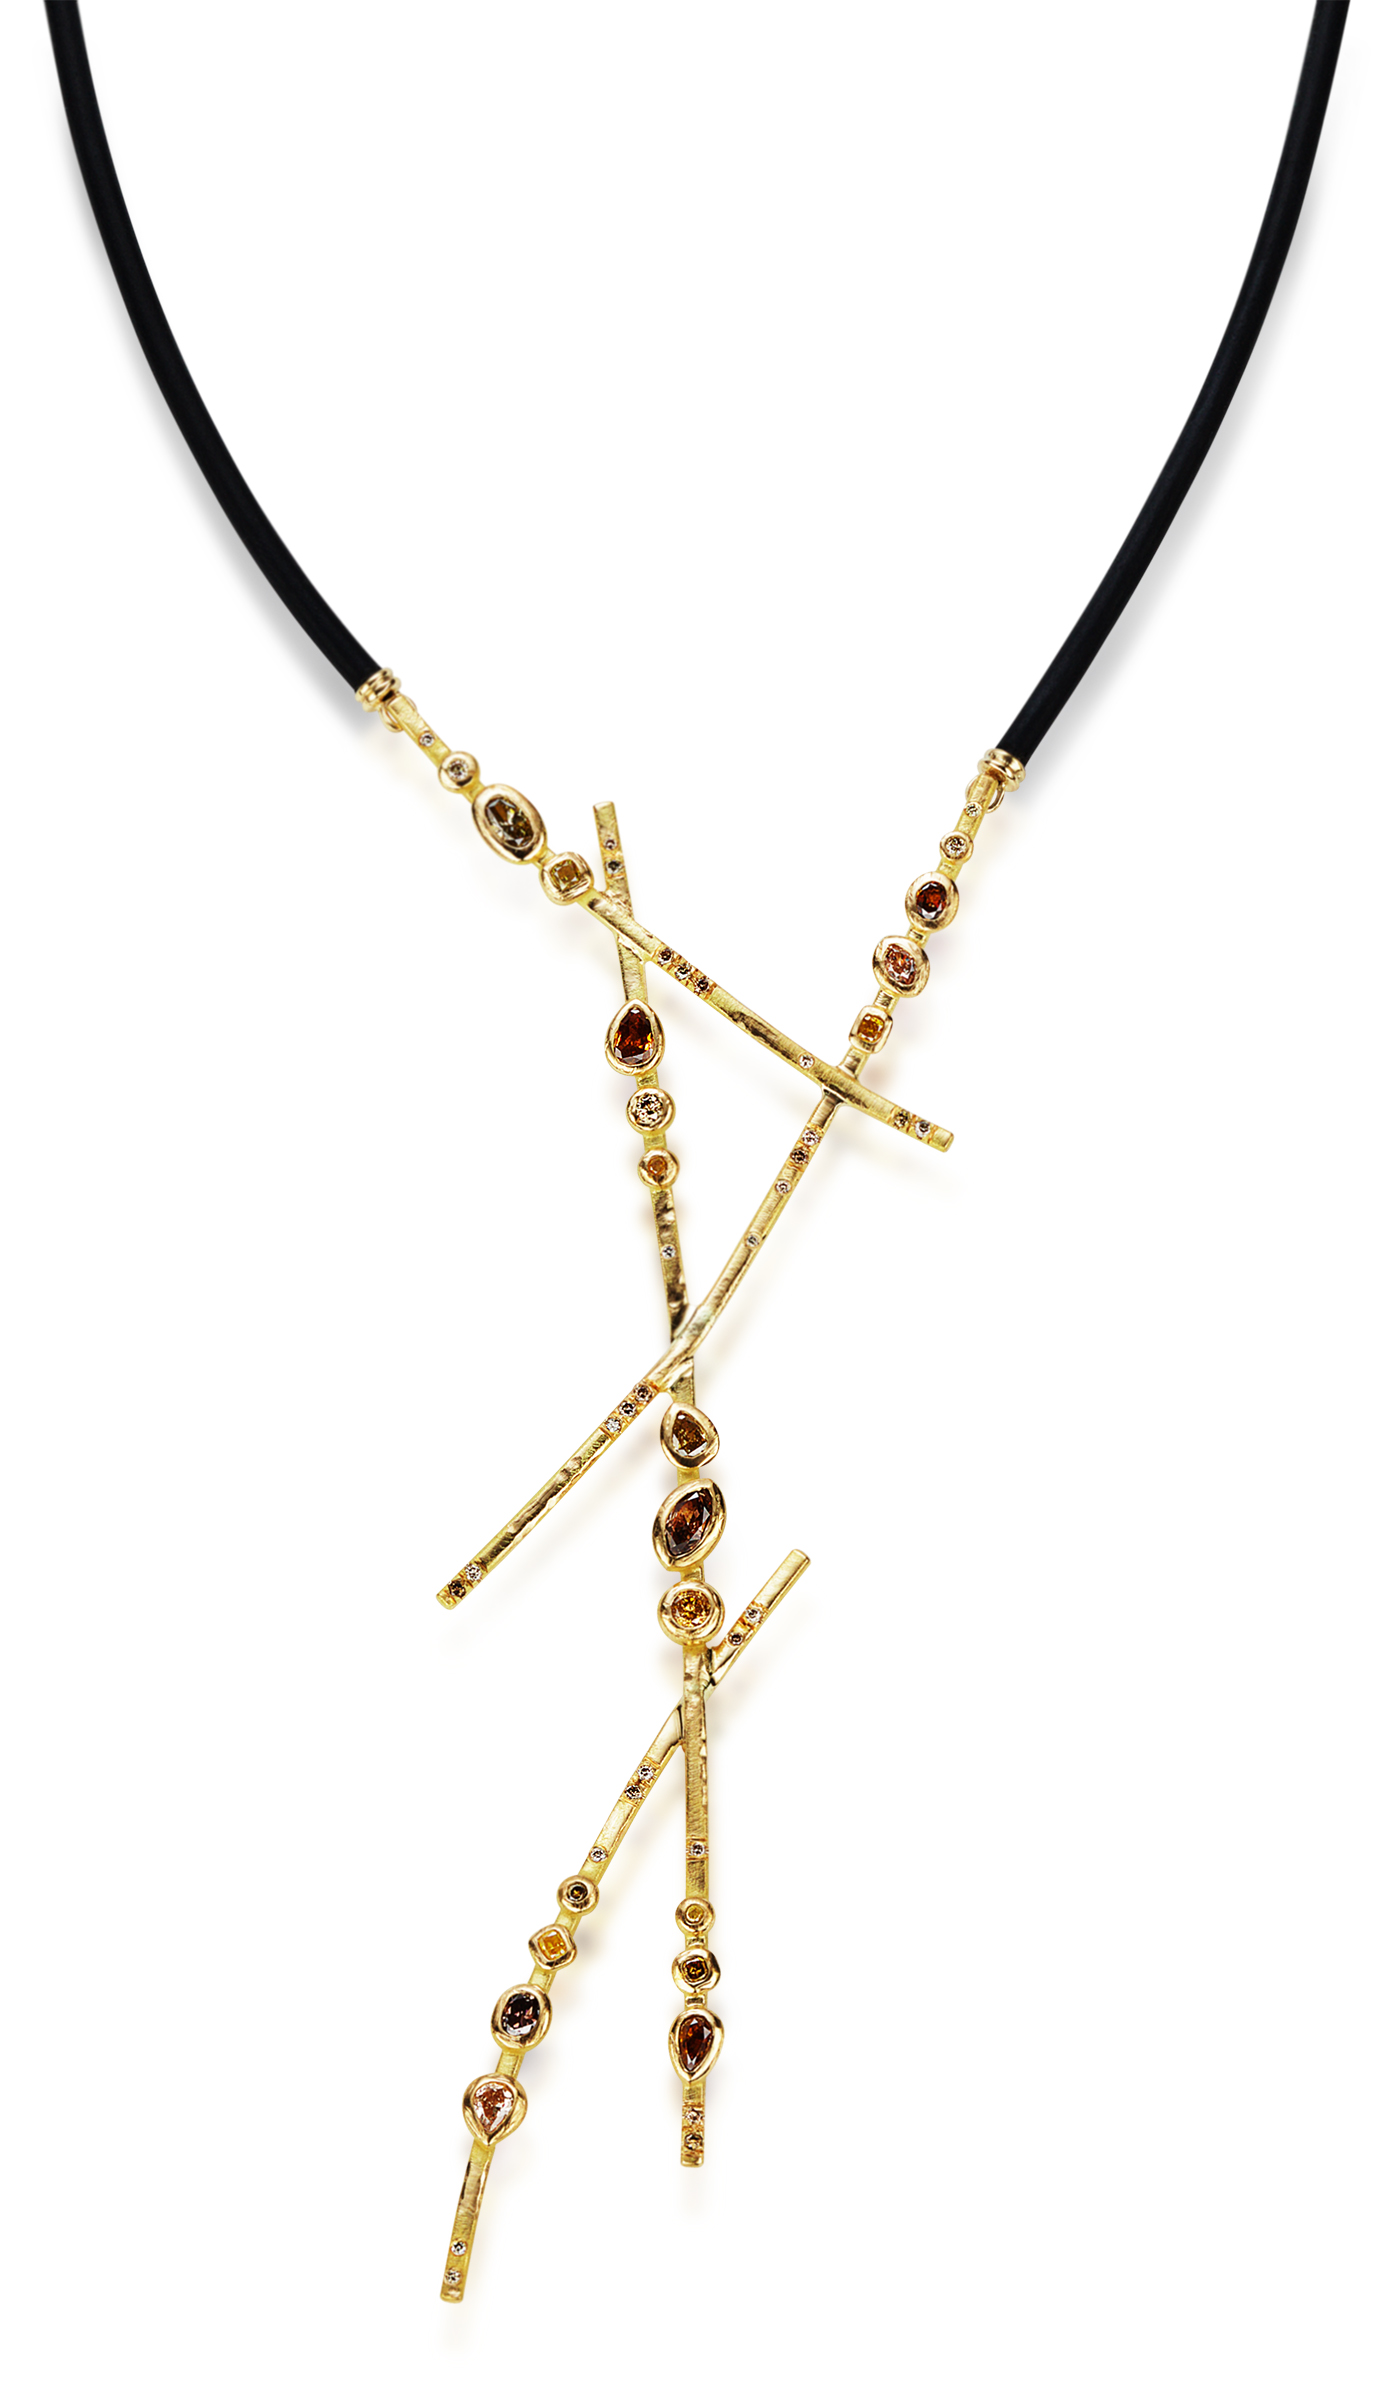 Crossroads necklace in 18K recycled gold featuring colored diamonds (4.41 TCW) and sand pavé on a 22-inch adjustable black leather cord and chain